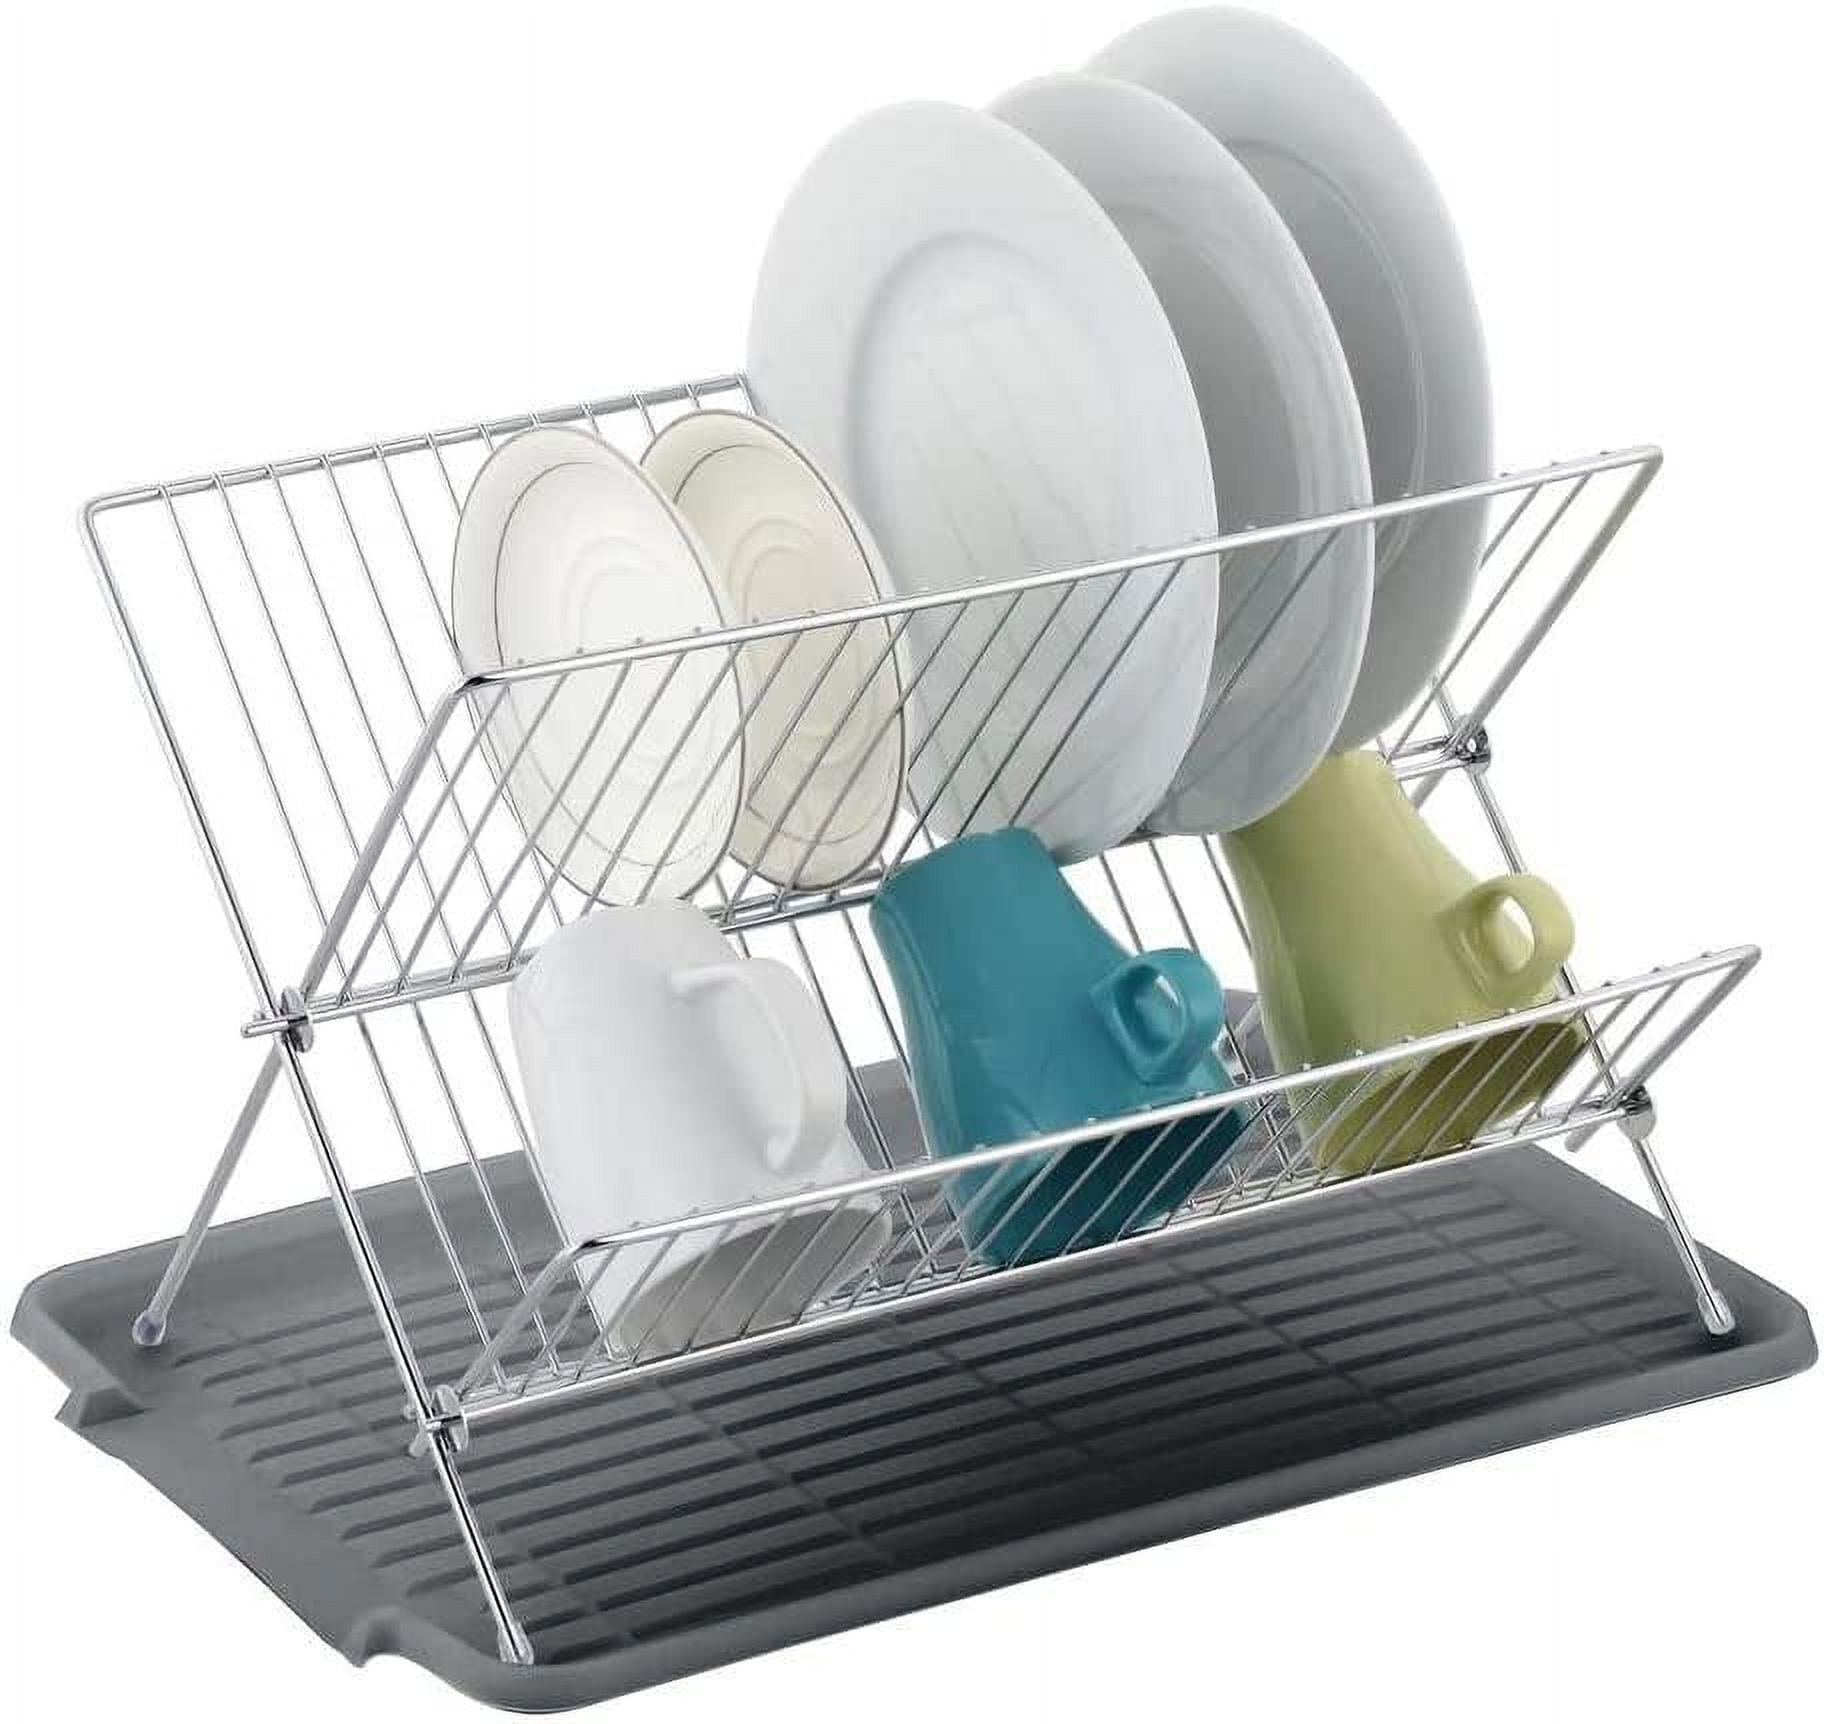 JASIWAY 16.8 in. Silver Stainless Steel 2-Tier Dish Rack Drying Rack with Drainboard, Utensil and Cup Holder